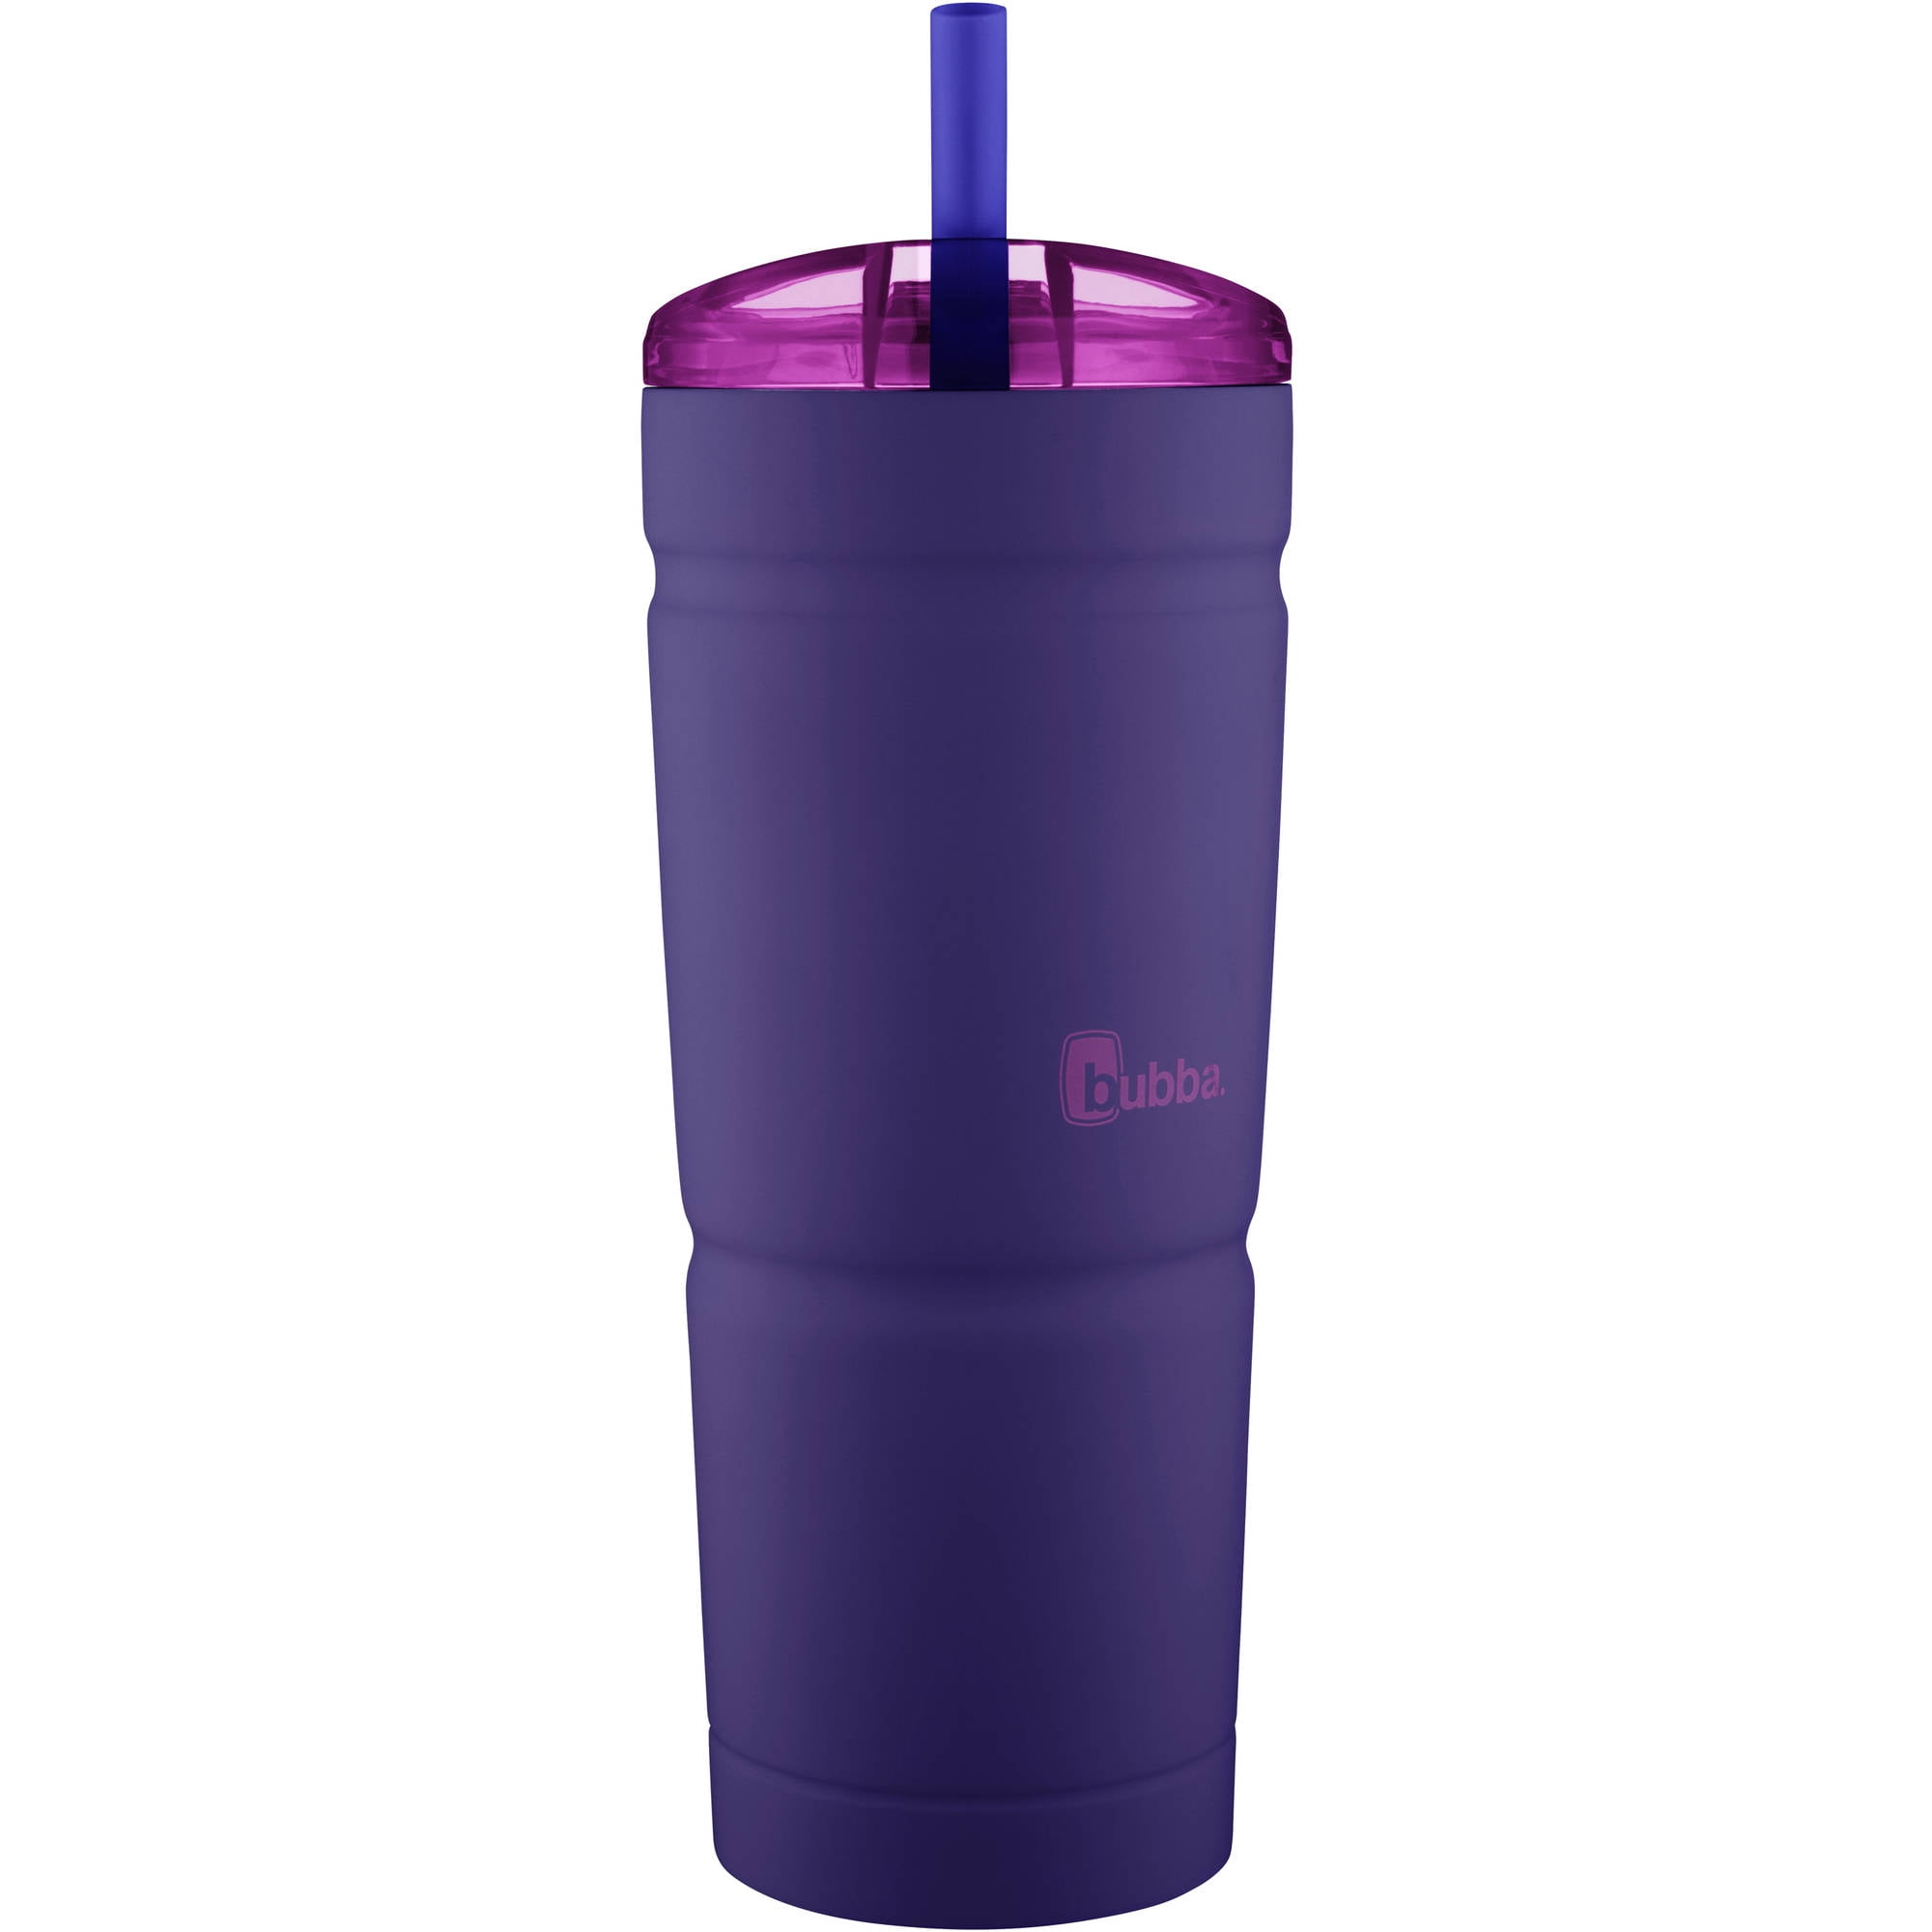 bubba Envy S Stainless Steel Tumbler with Straw Matte Purple, 24 fl oz. 